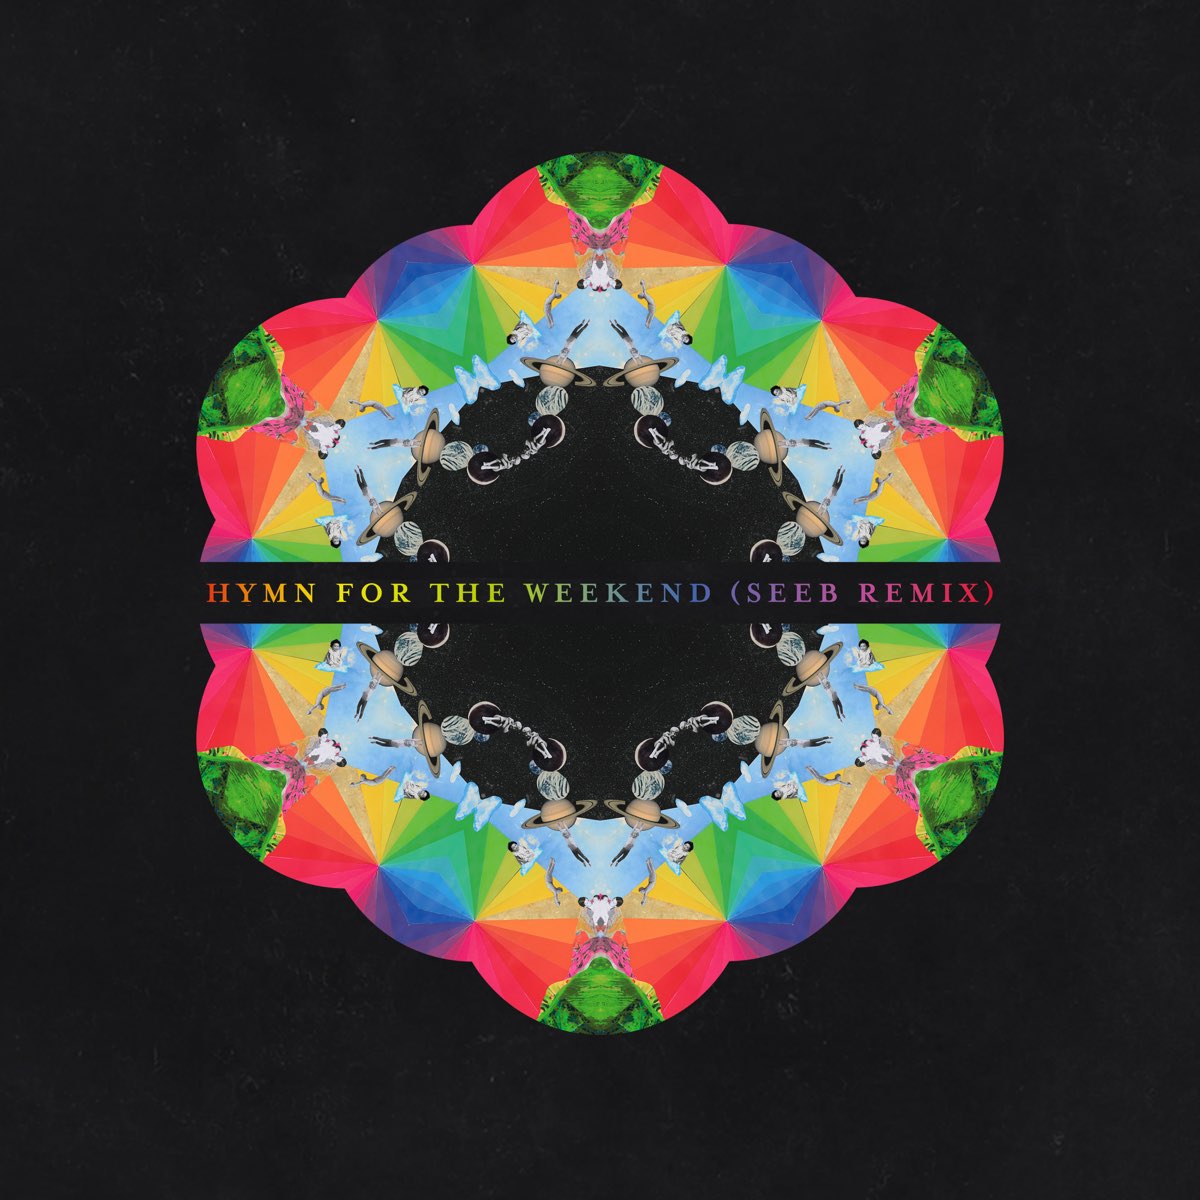 Living for the weekend. Колдплей обложка Hymn. Coldplay Hymn for the weekend. Бейонсе Coldplay Hymn for the weekend. Колдплей Веекенд.